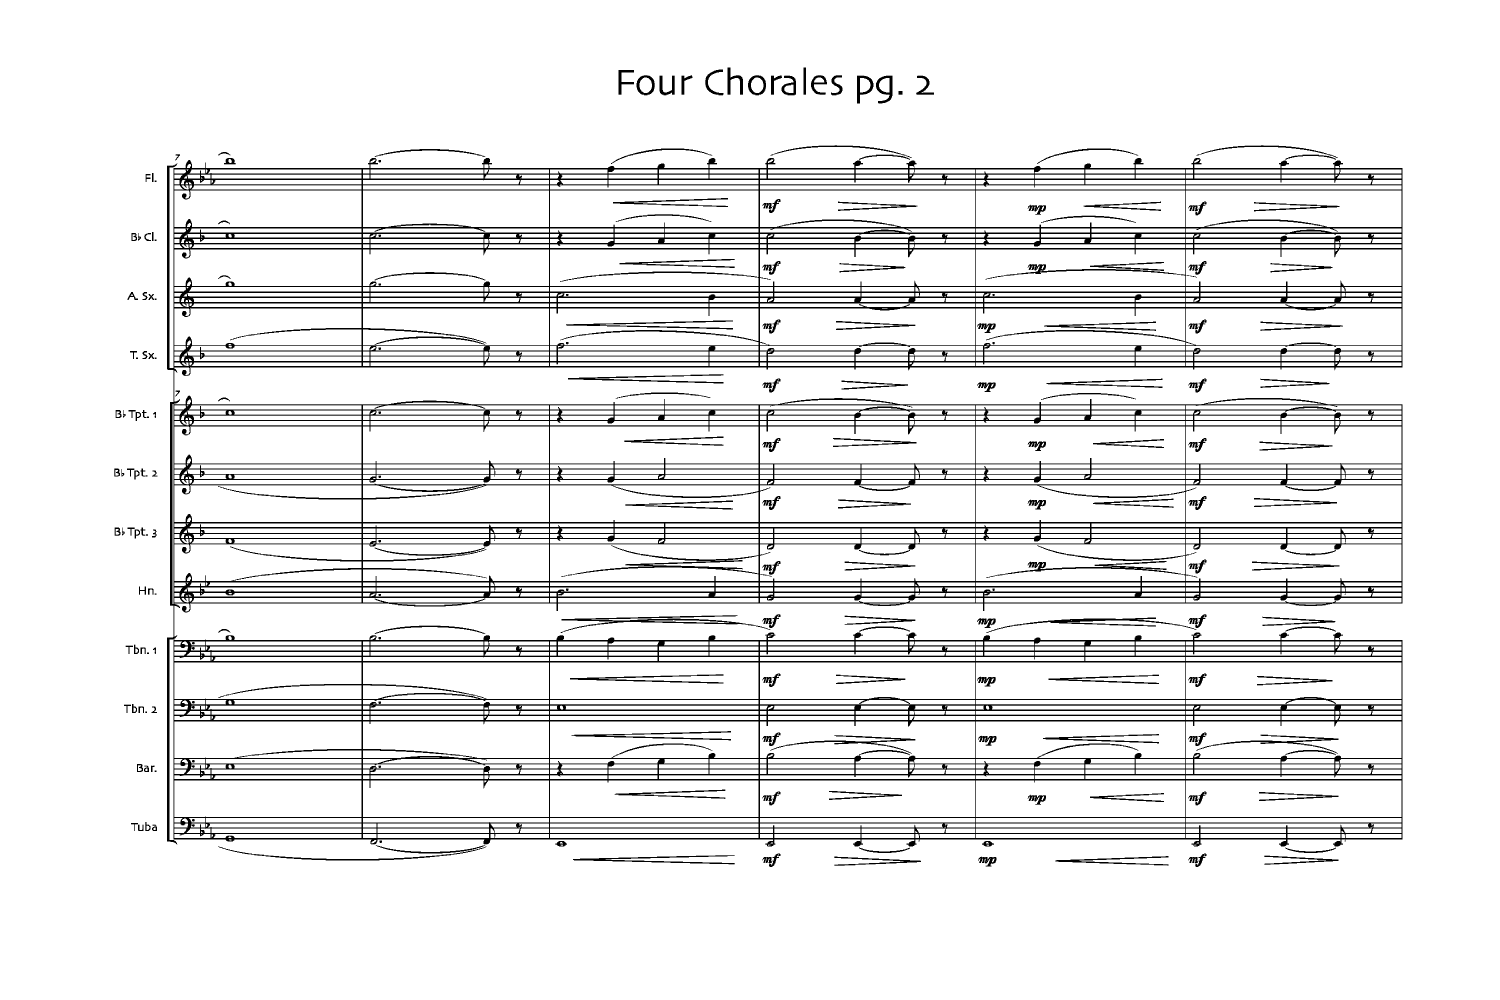 FOUR CHORALES